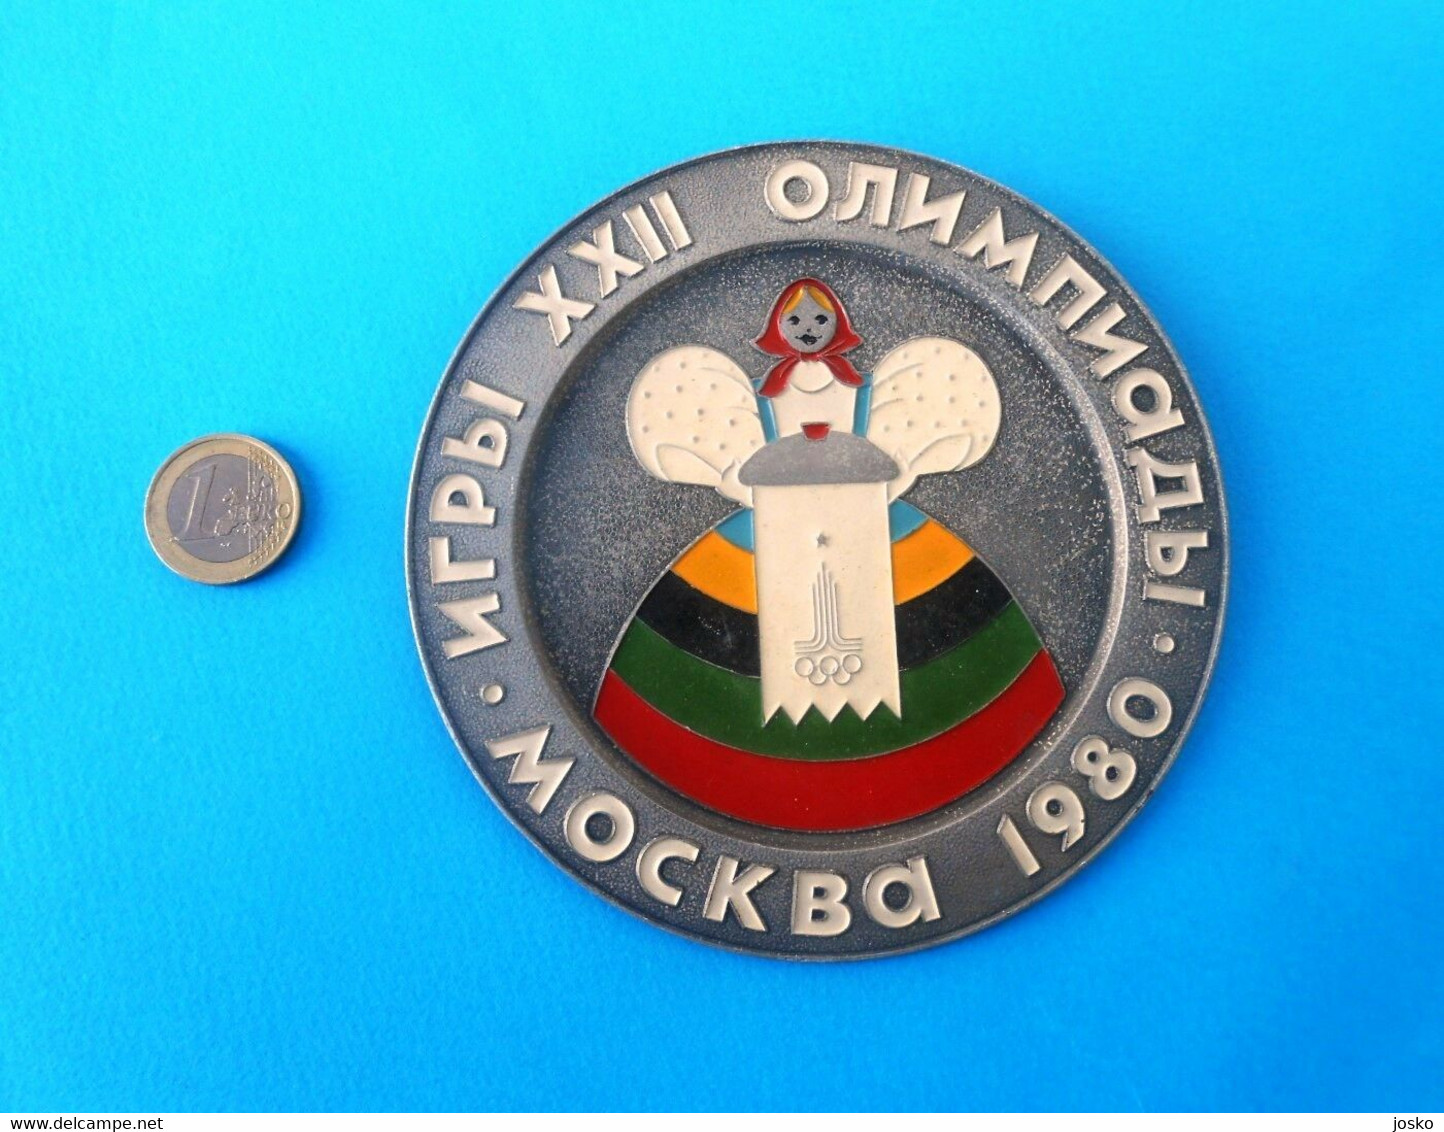 SUMMER OLYMPIC GAMES MOSCOW 1980 - Beautifull Vintage Plate * Olympiad Olympiade Olympia Olimpici Jeux Olympiques - Bekleidung, Souvenirs Und Sonstige